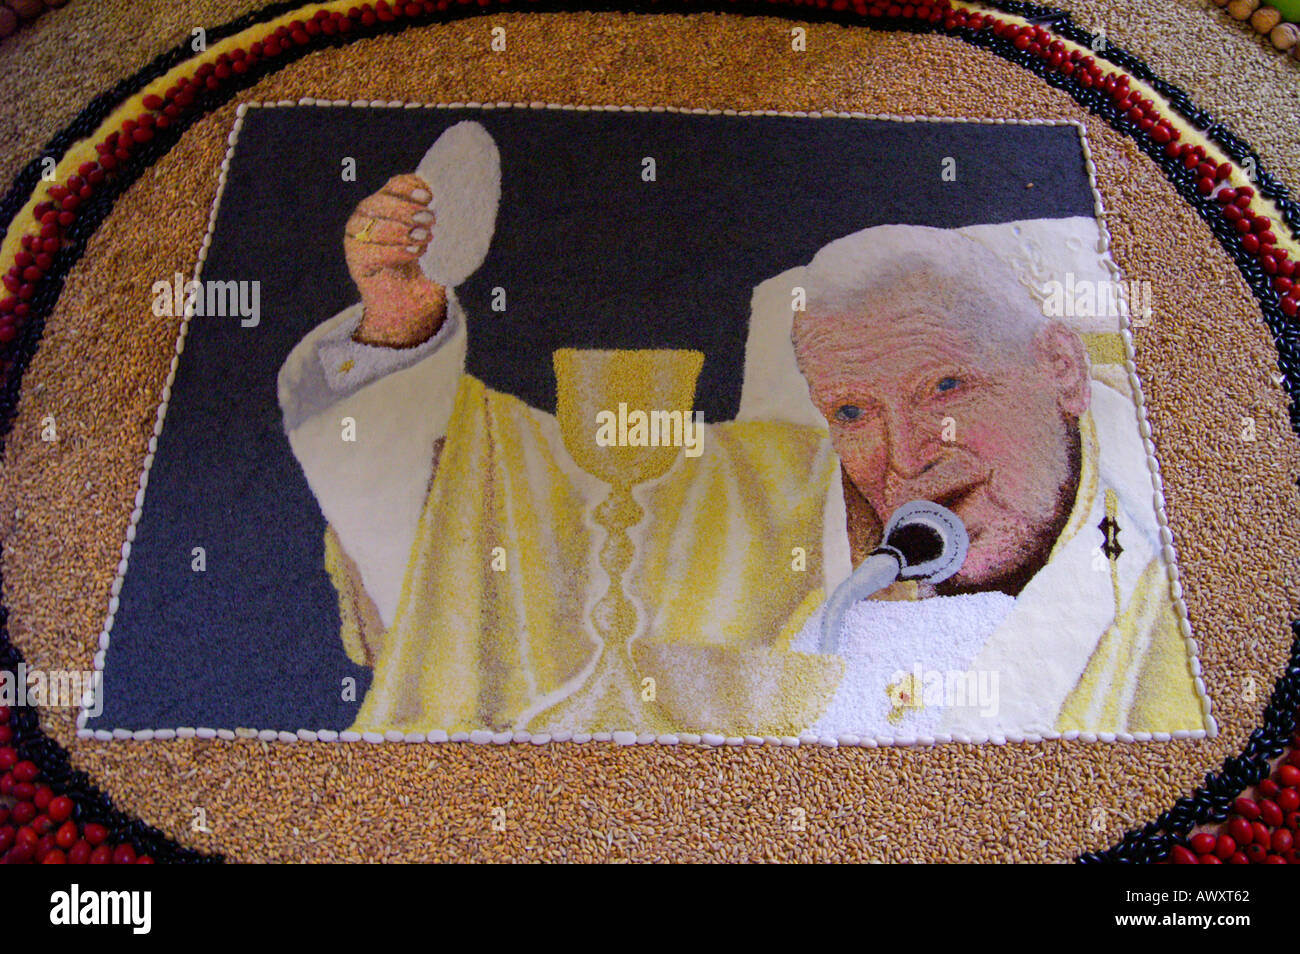 Pope Benedict Ratzinger blessing, painting made of seed and colourful sand Stock Photo